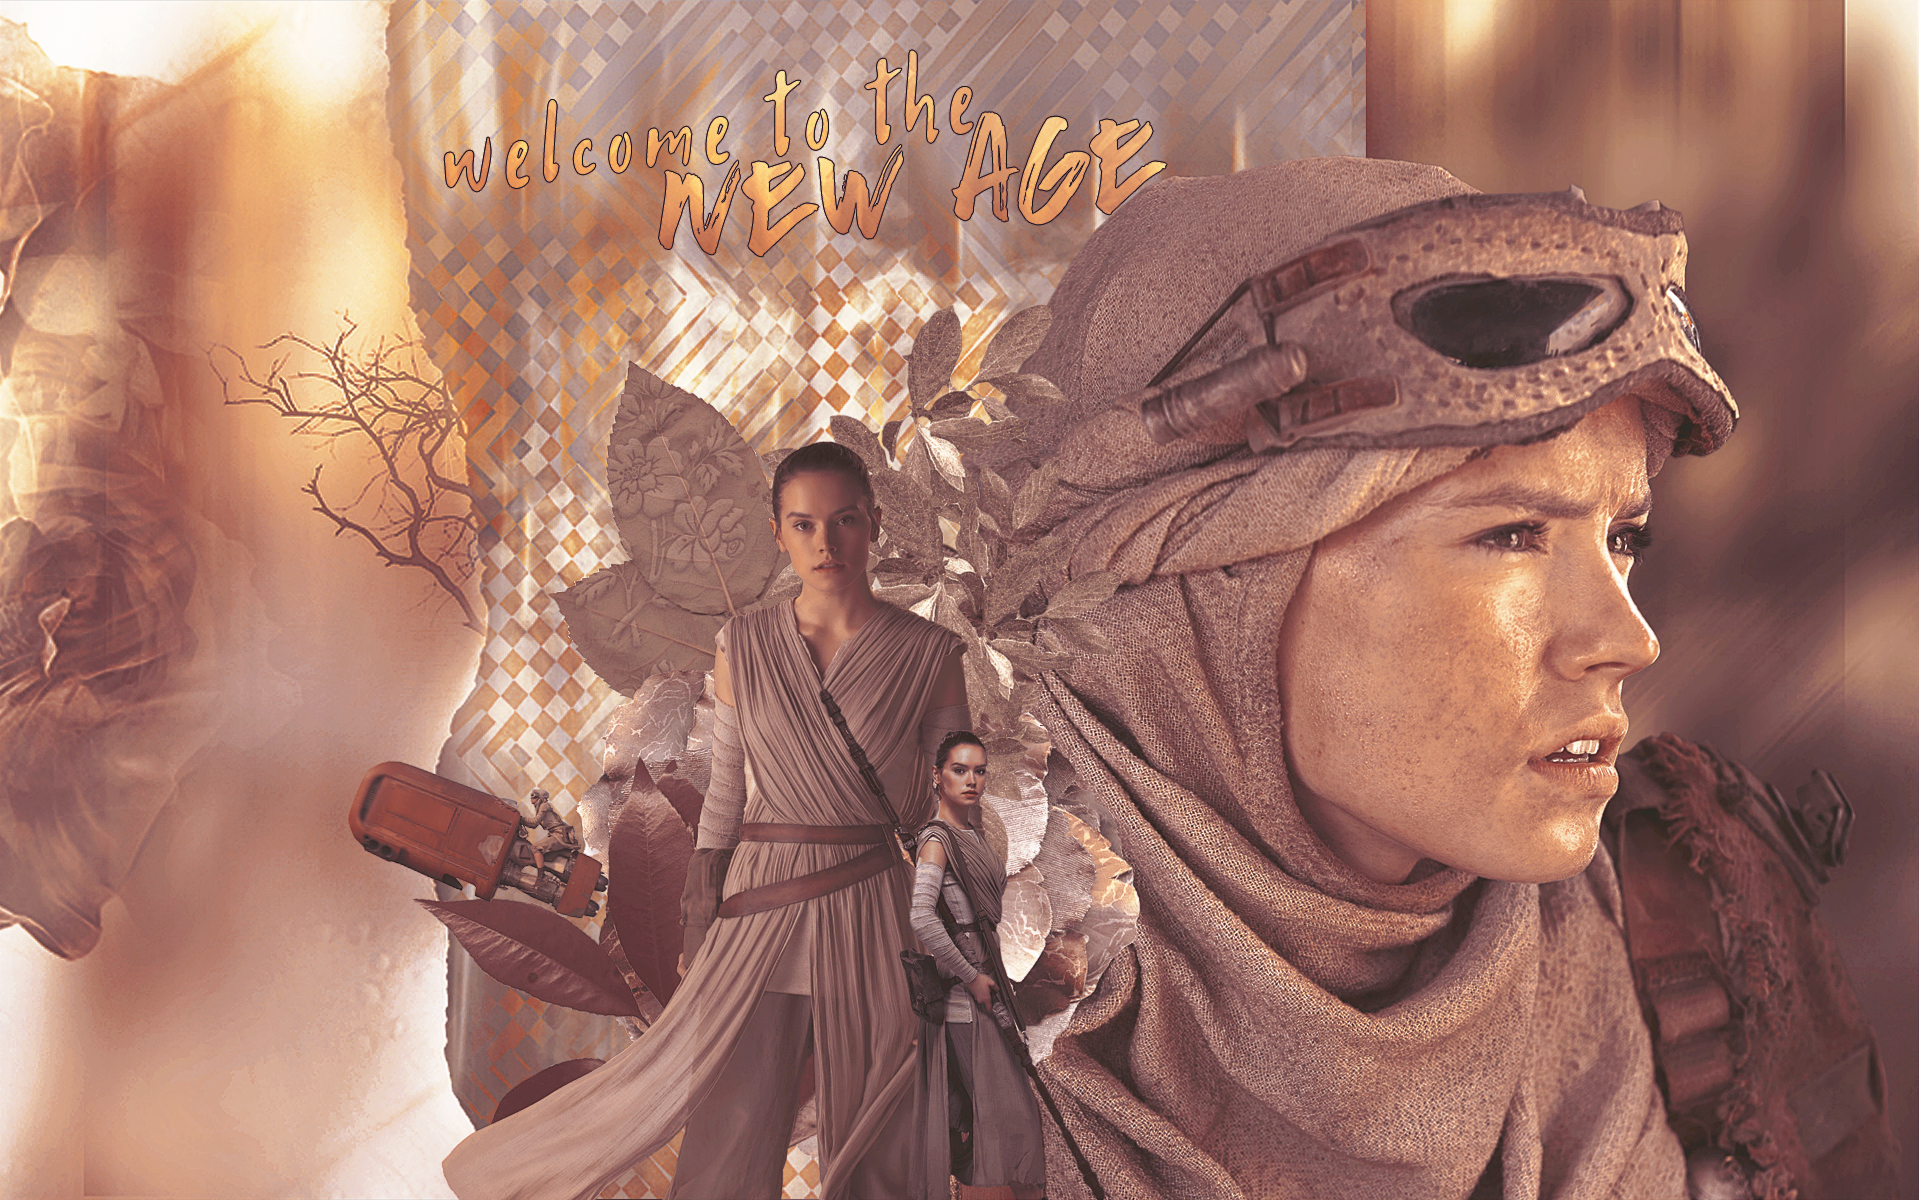 Rey Wallpaper - Welcome To The New Age